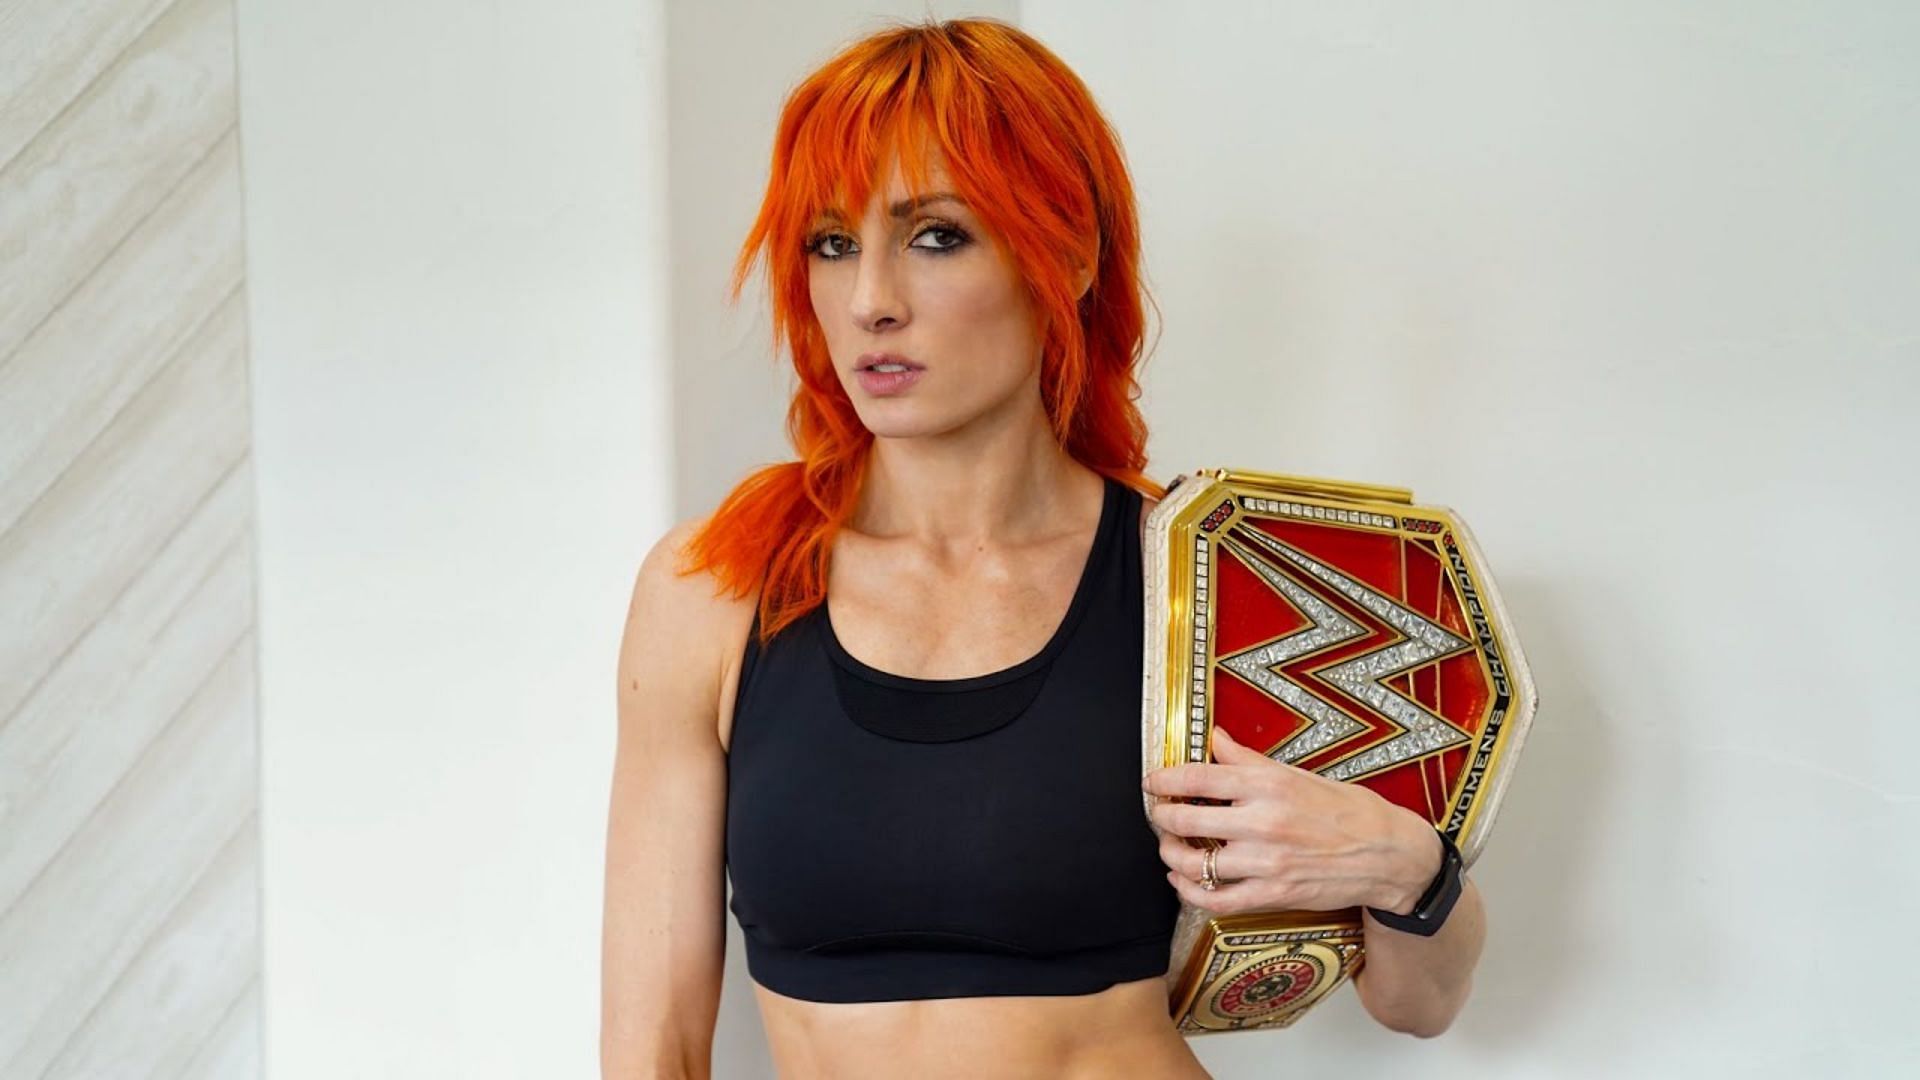 Becky Lynch changed her look before WrestleMania 38.